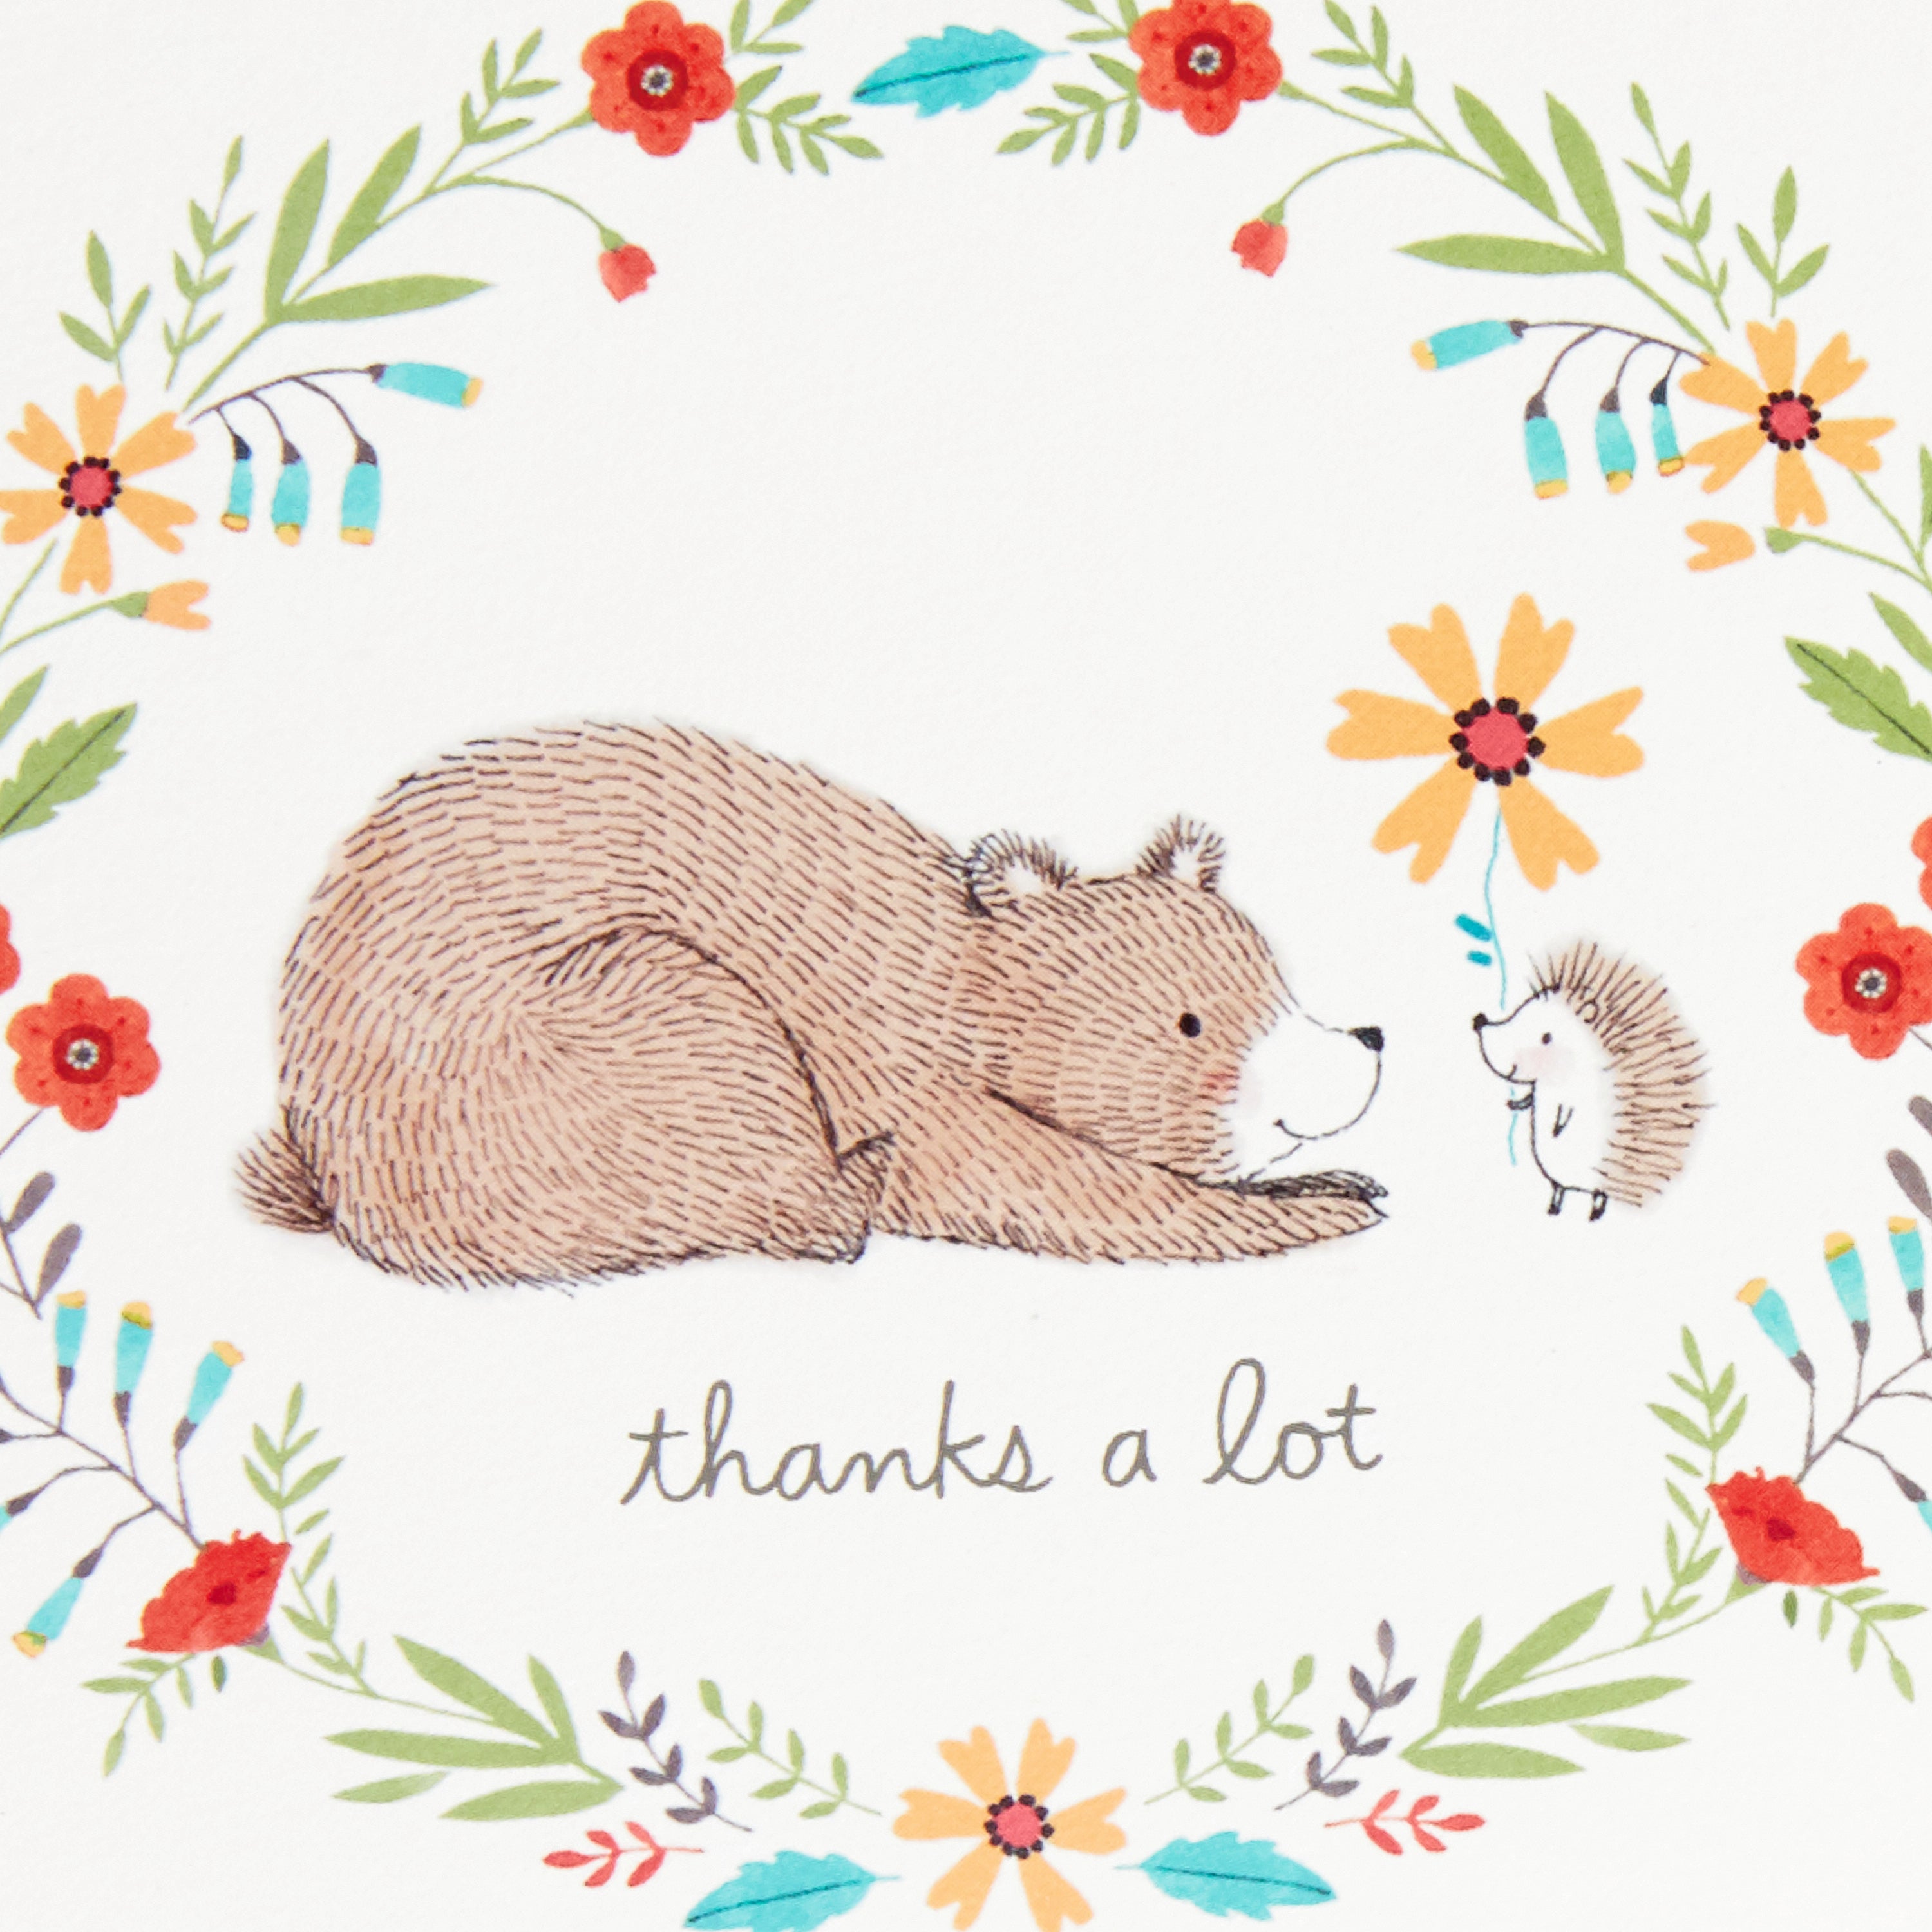 Baby Shower Thank You Cards Assortment, Woodland Animals (48 Cards with Envelopes for Baby Boy or Baby Girl) Deer, Owl, Bear, Fox